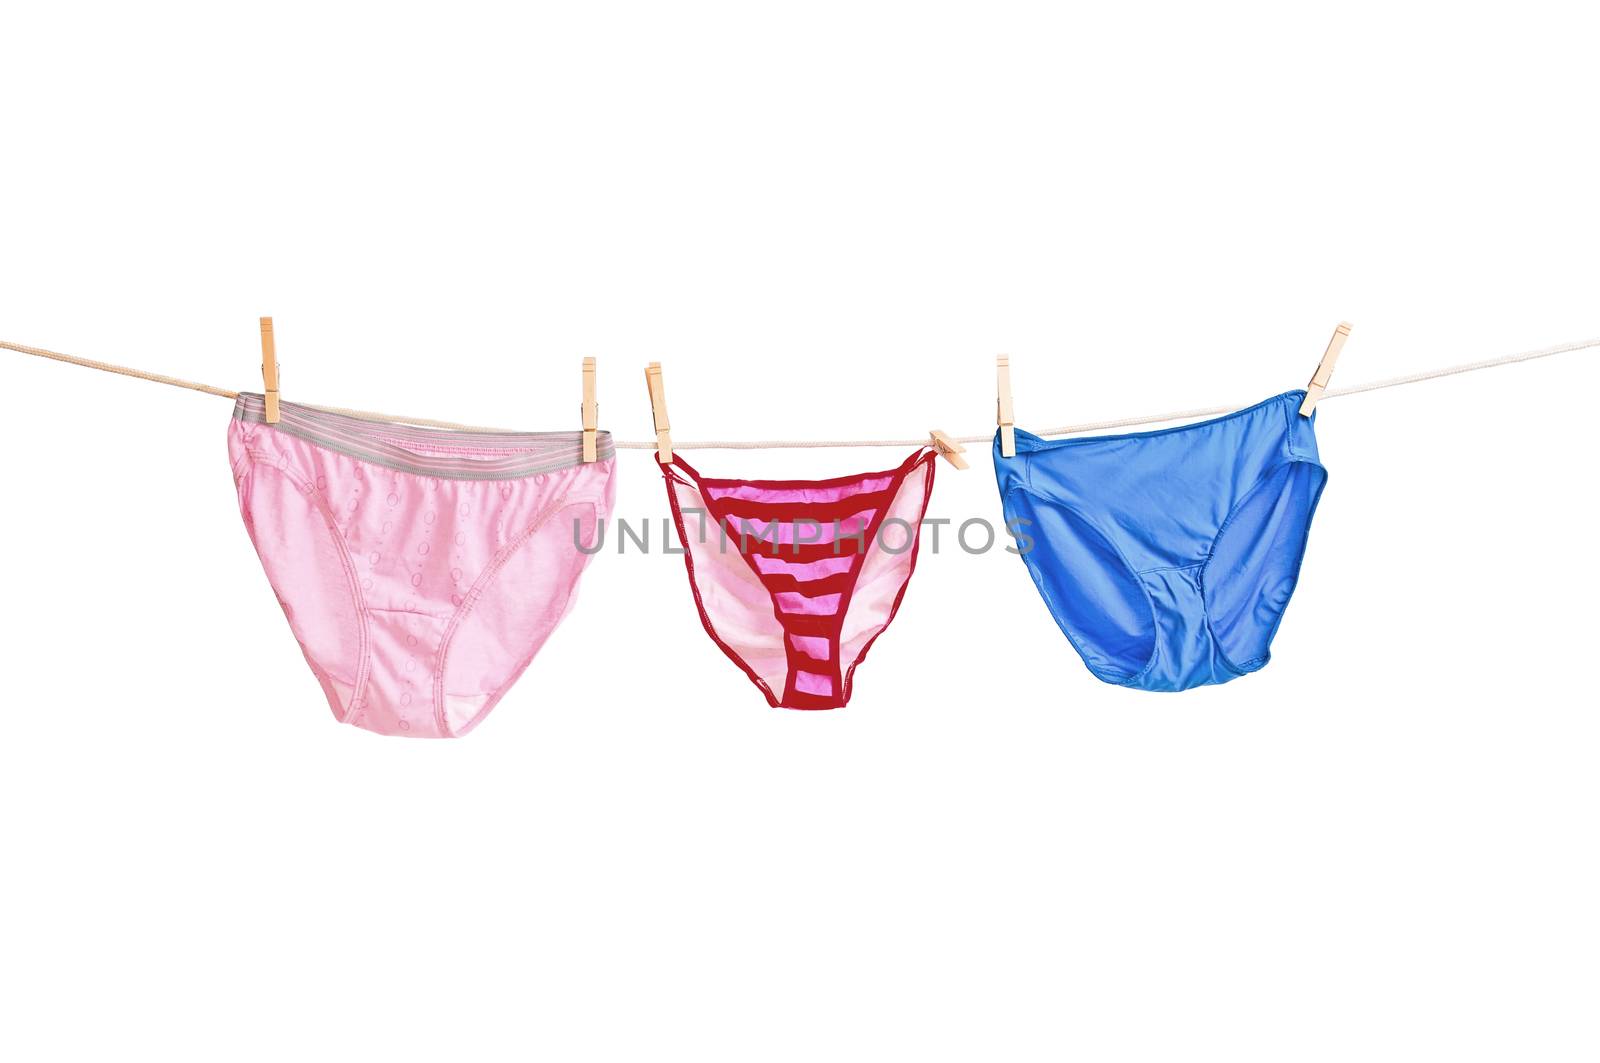 Three pair of womens panties hanging on a clothesline